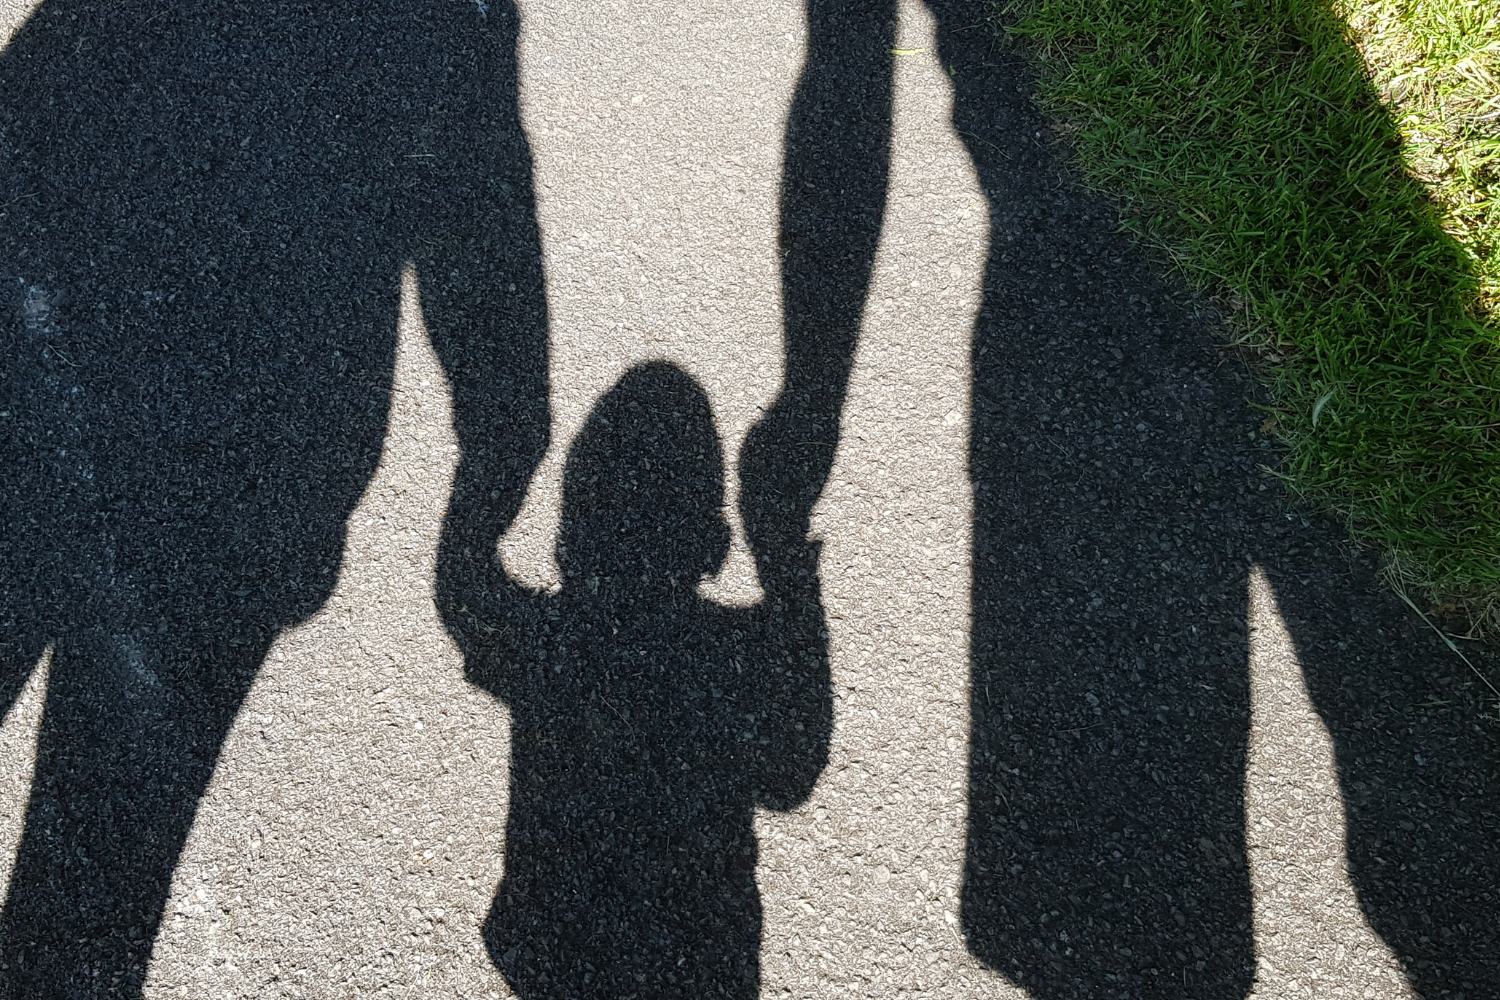 shadows on the ground showing parents holding a childs hands